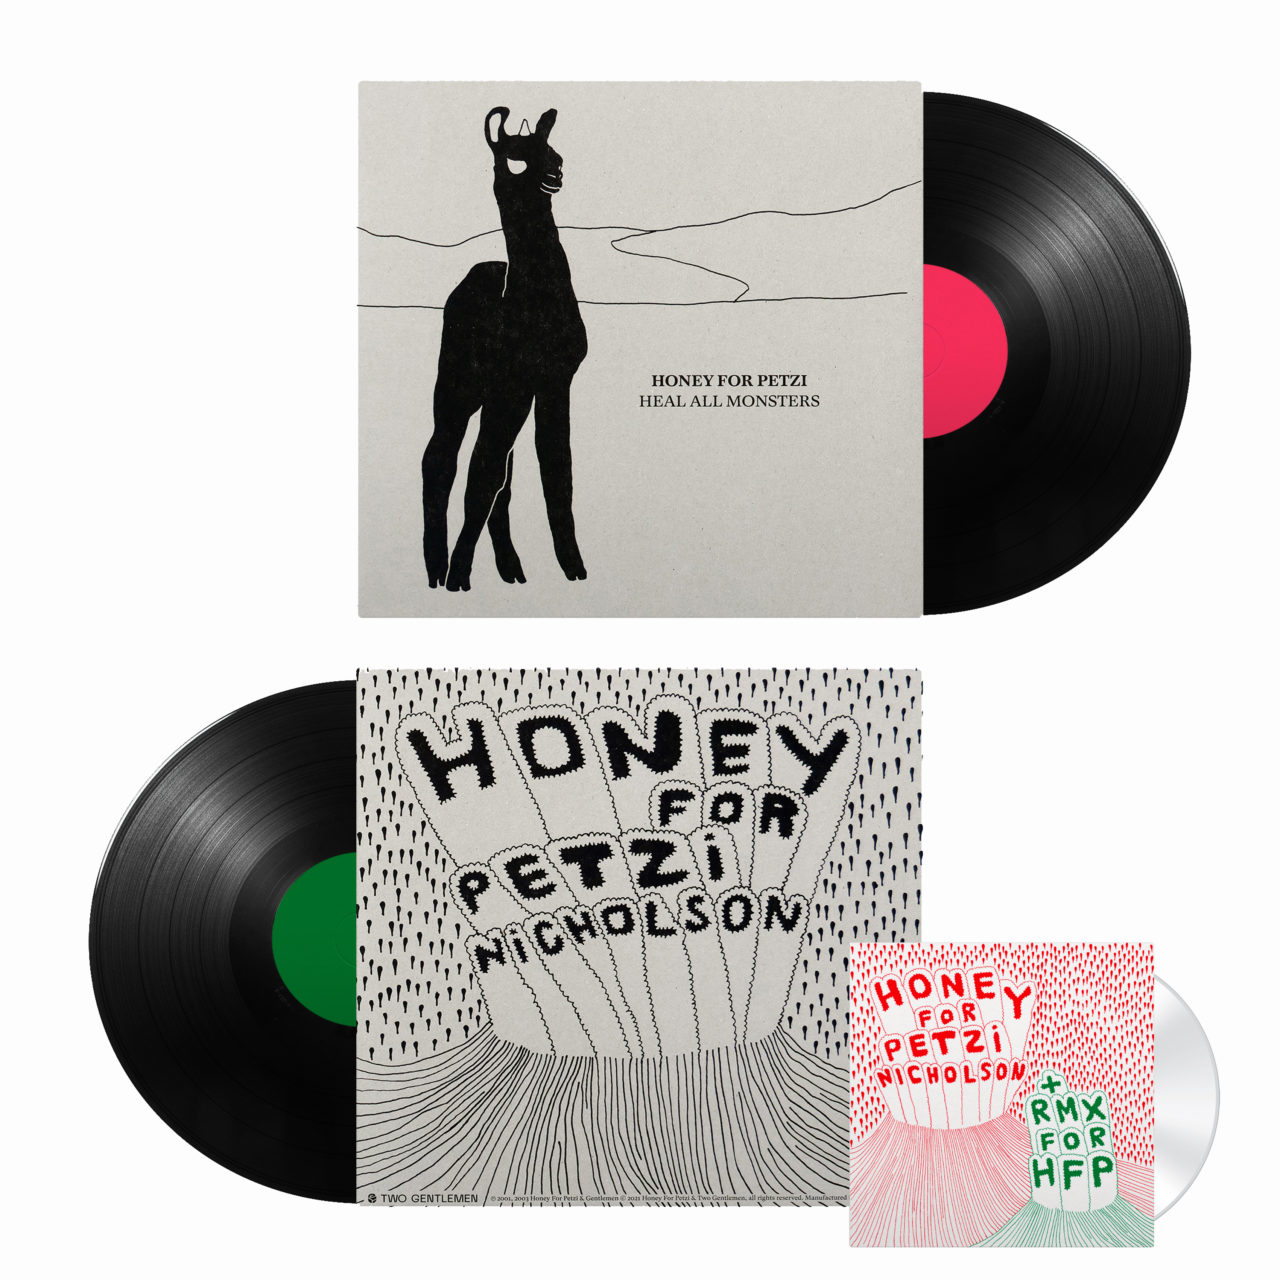 HONEY FOR PETZI - Heal All Monsters & Nicholson Vinyl Reissue - Limited Bundle: 2LP Heal All Monsters & Nicholson + RMX For HFP on CD